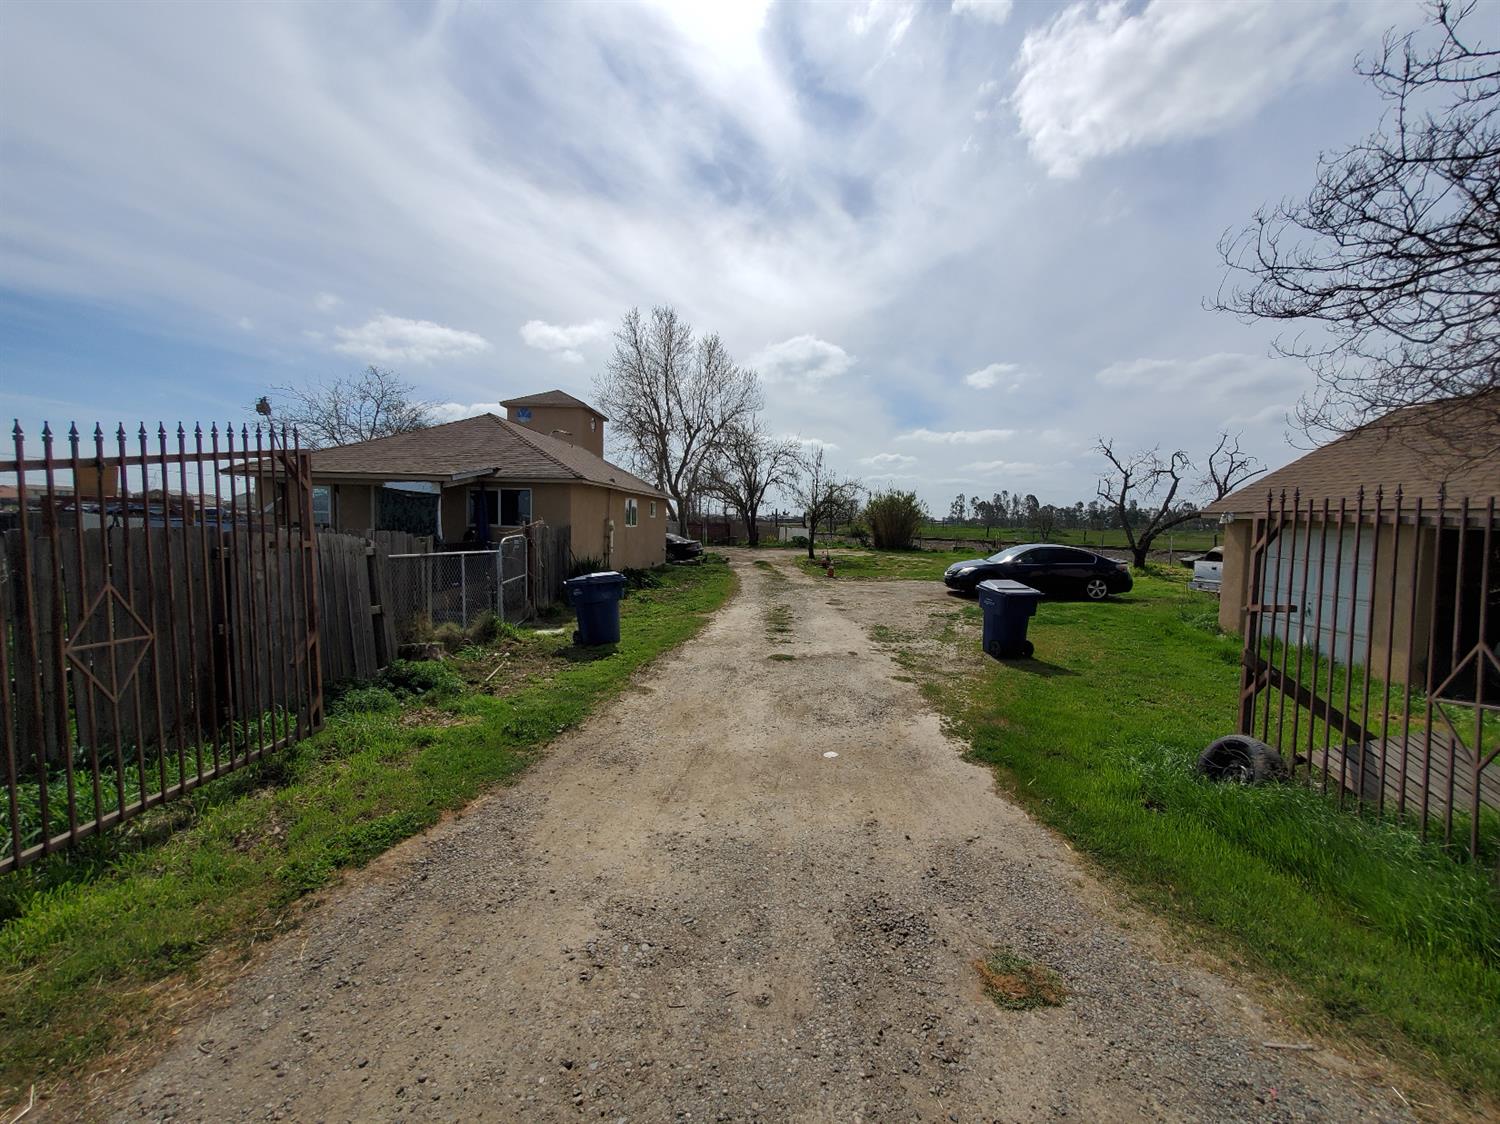 Build up to 6 single family homes or multi-family homes on this 0.79 acre lot that is zoned R-10.  There are currently four structures on the property.  There is one home, detached garage and three other structures on property.  Tenant is on month to month lease.